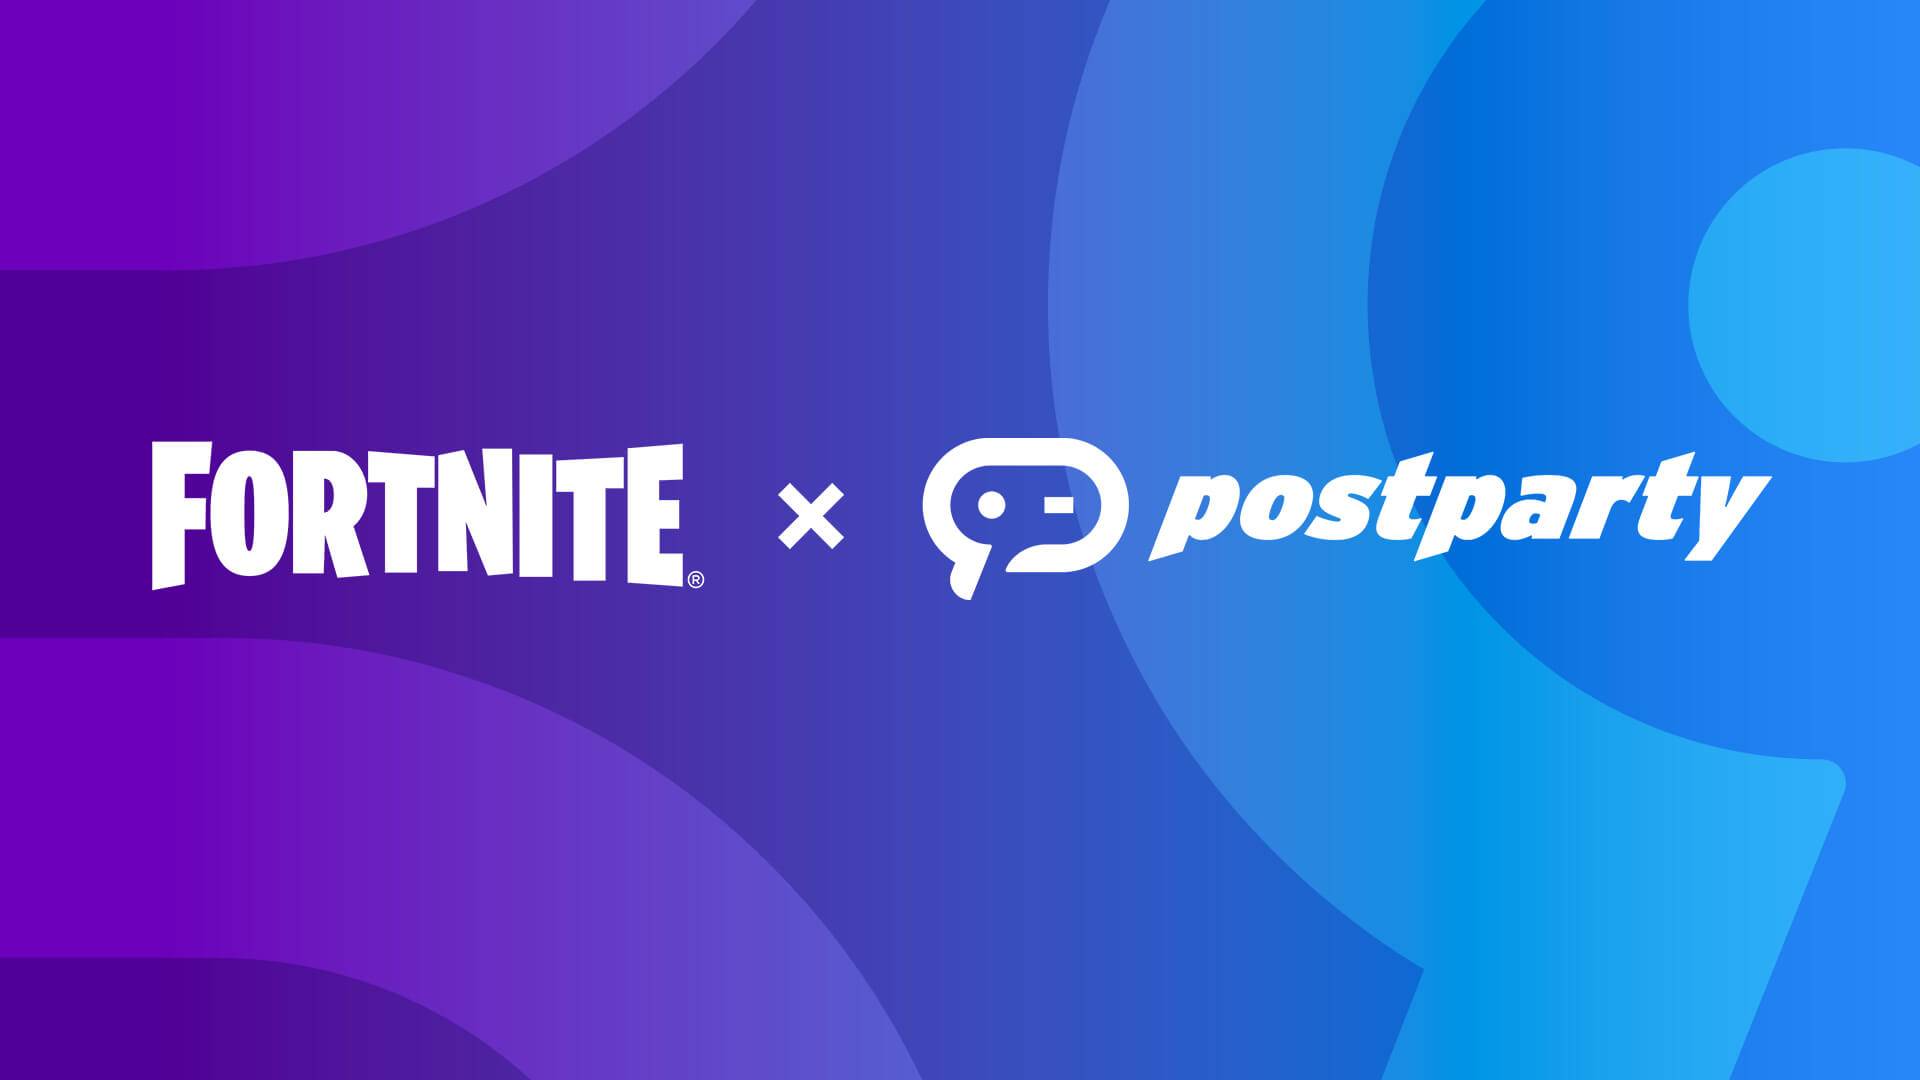 Fortnite and Postparty integration by Epic Games (Photo credit Fortnite)